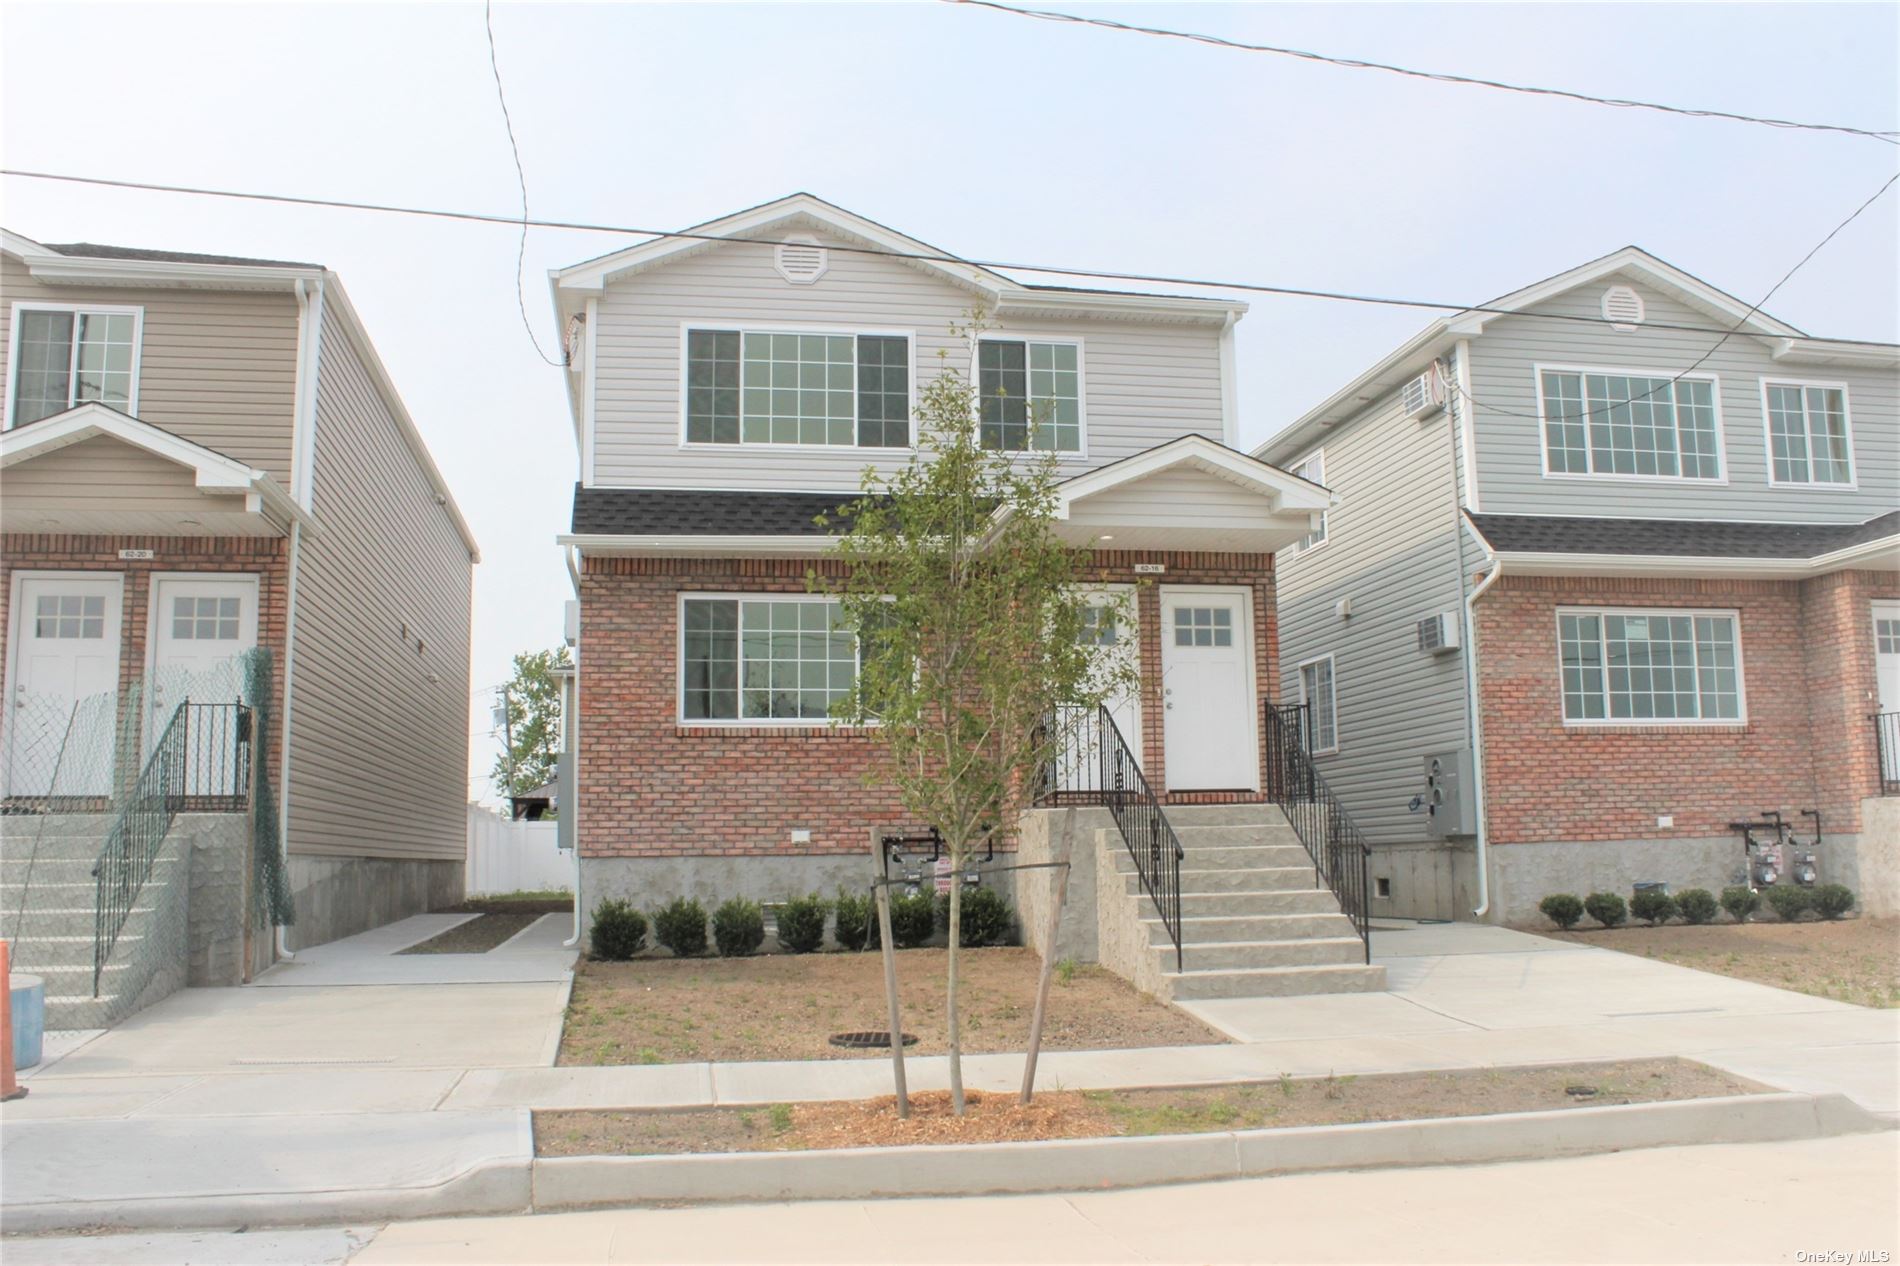 Two Family in Arverne - Hillmeyer  Queens, NY 11692